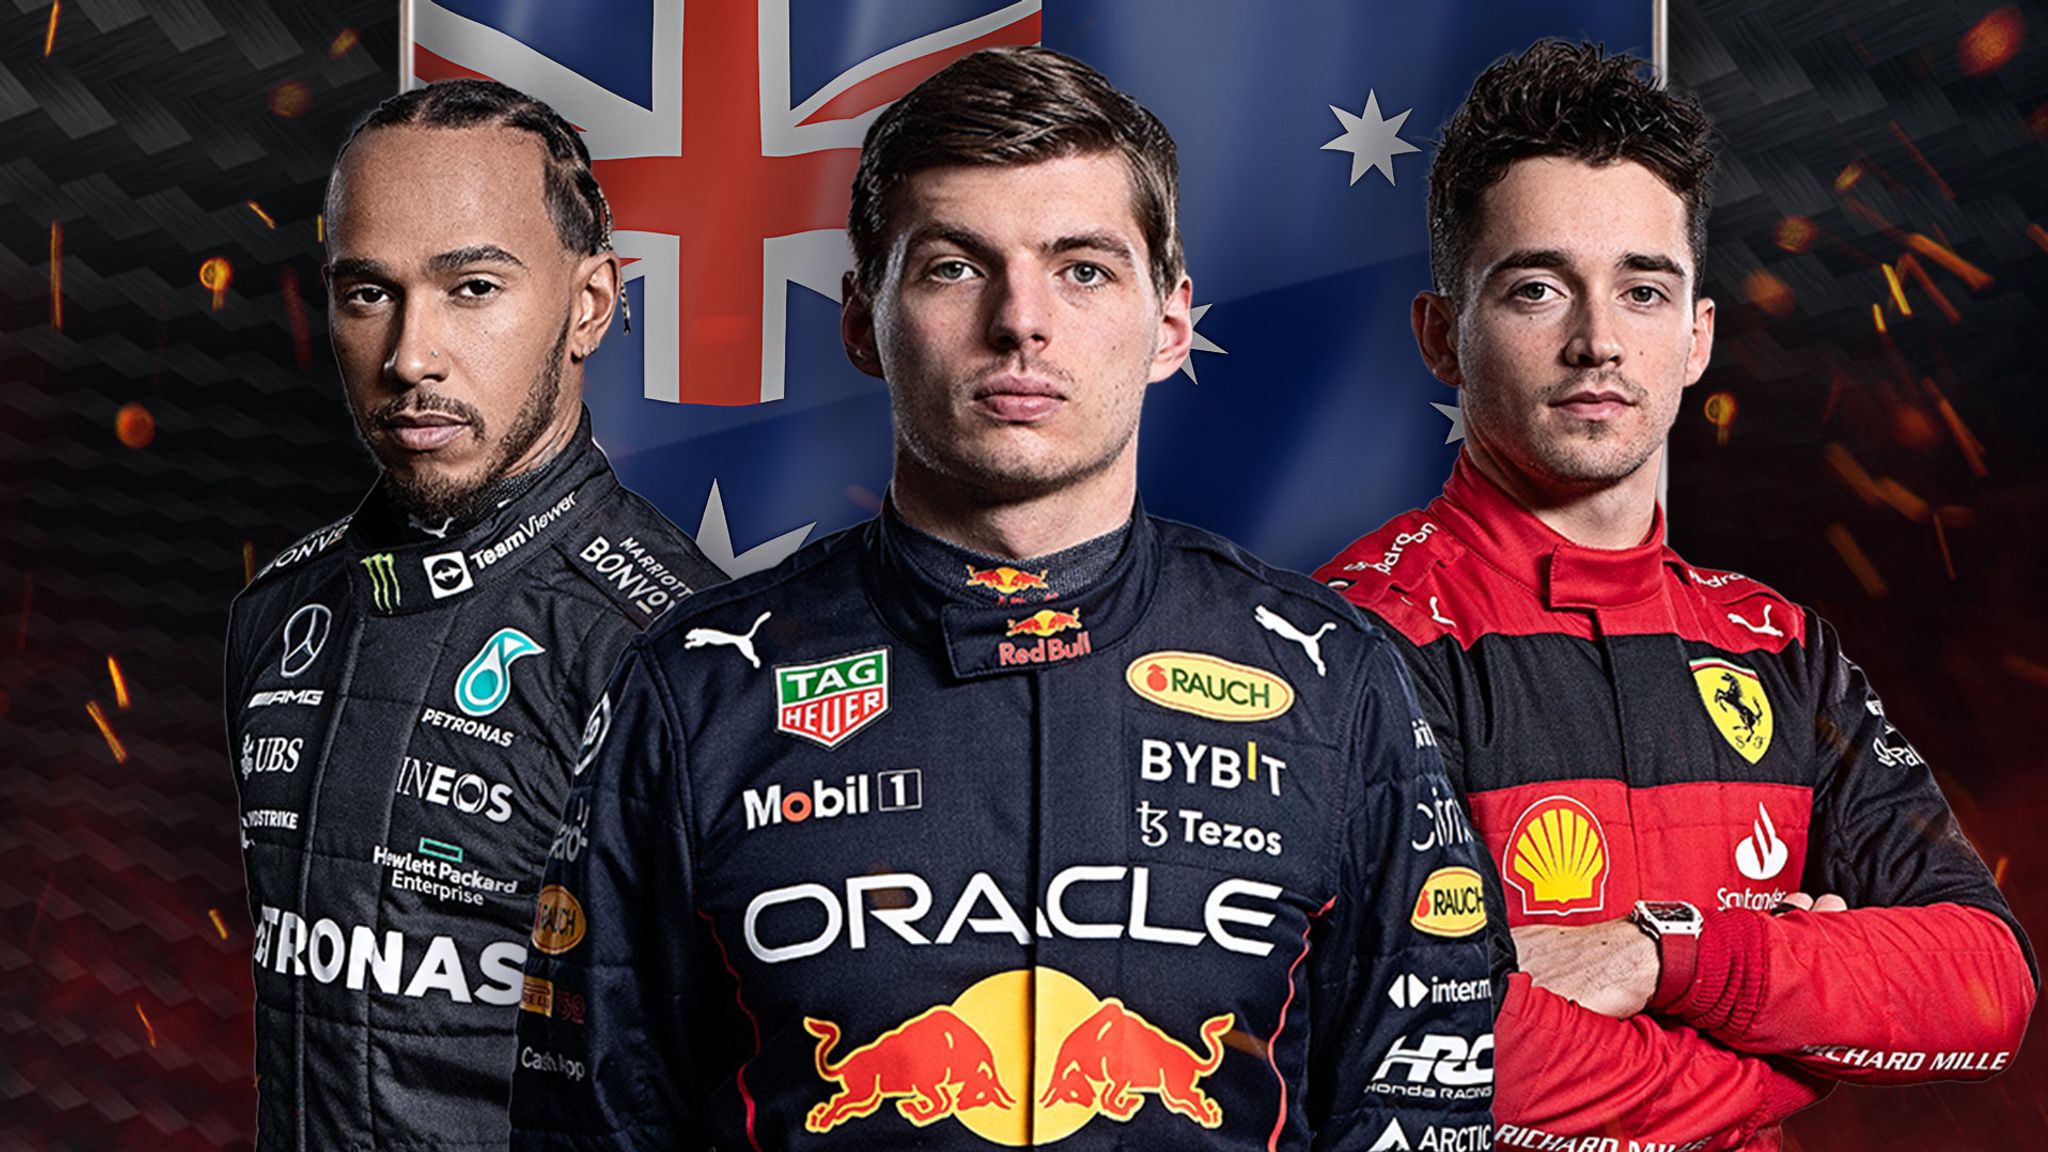 Australian GP F1 Show live stream Catch up on all the storylines from Albert Park F1 News